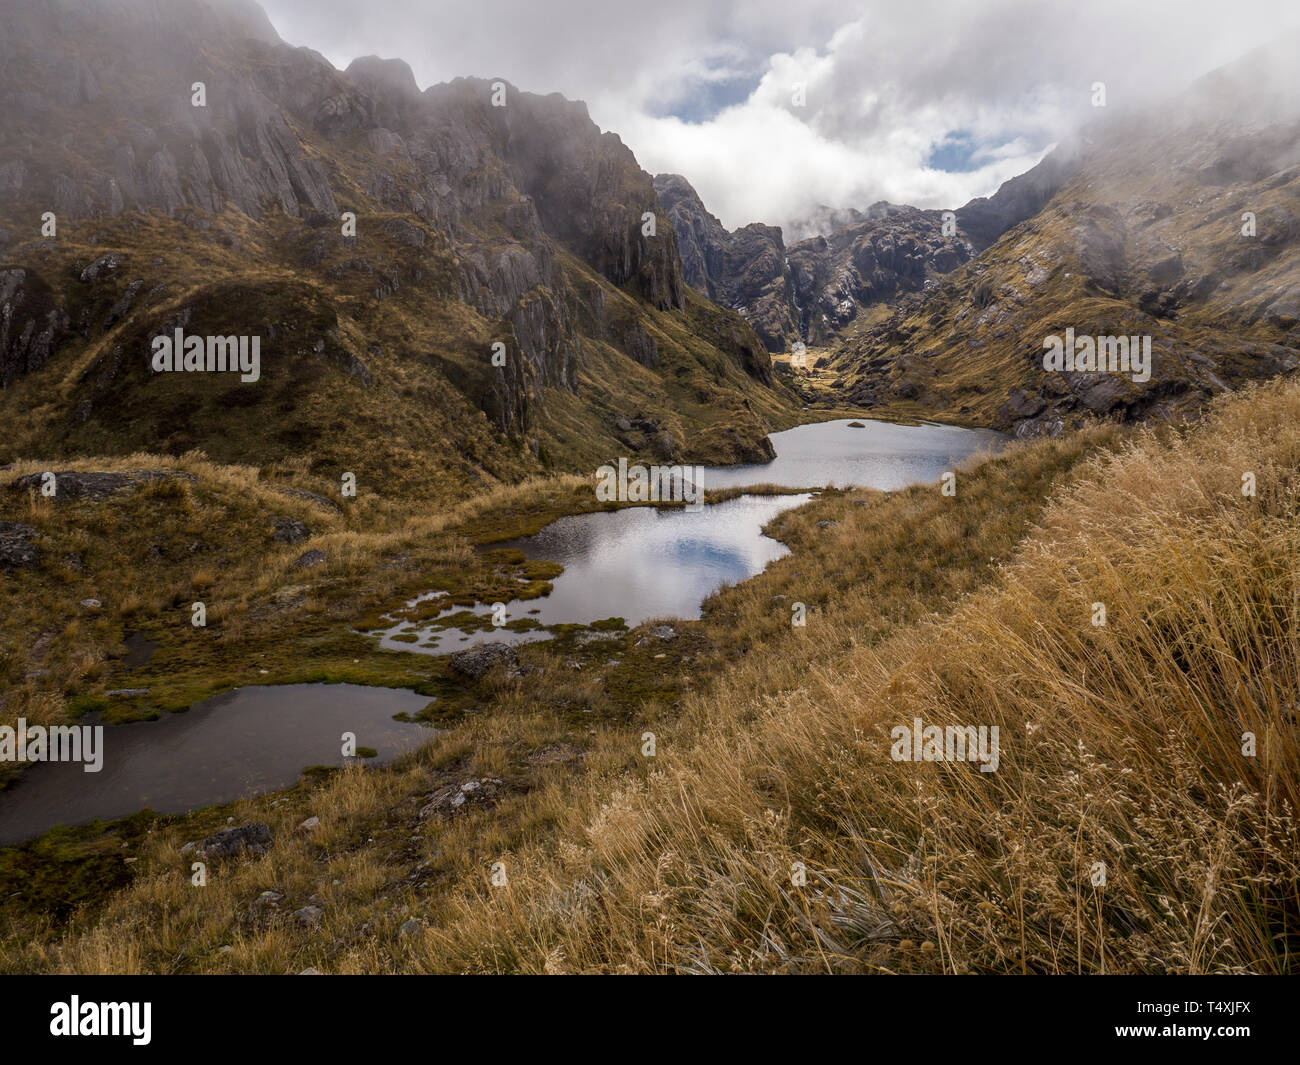 Horizontal image of a series of three small glacial lakes or tarns with moody, misty clouds, rocky mountain walls and short, brown grasses. Stock Photo